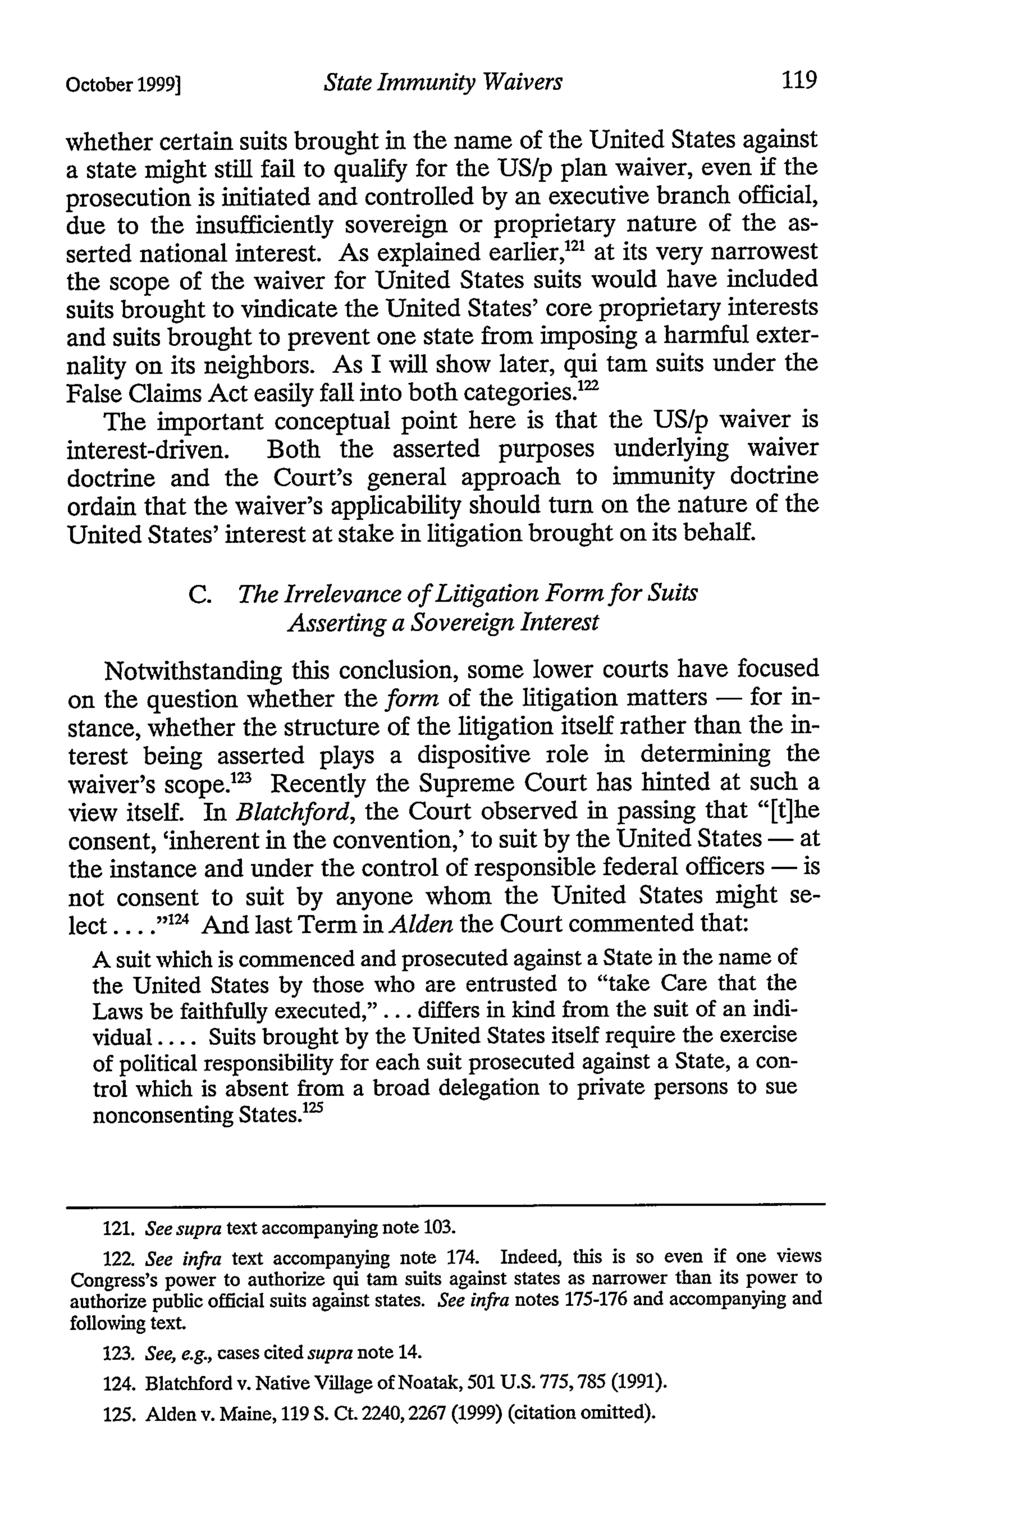 October 1999] State Immunity Waivers whether certain suits brought in the name of the United States against a state might still fail to qualify for the US/p plan waiver, even if the prosecution is